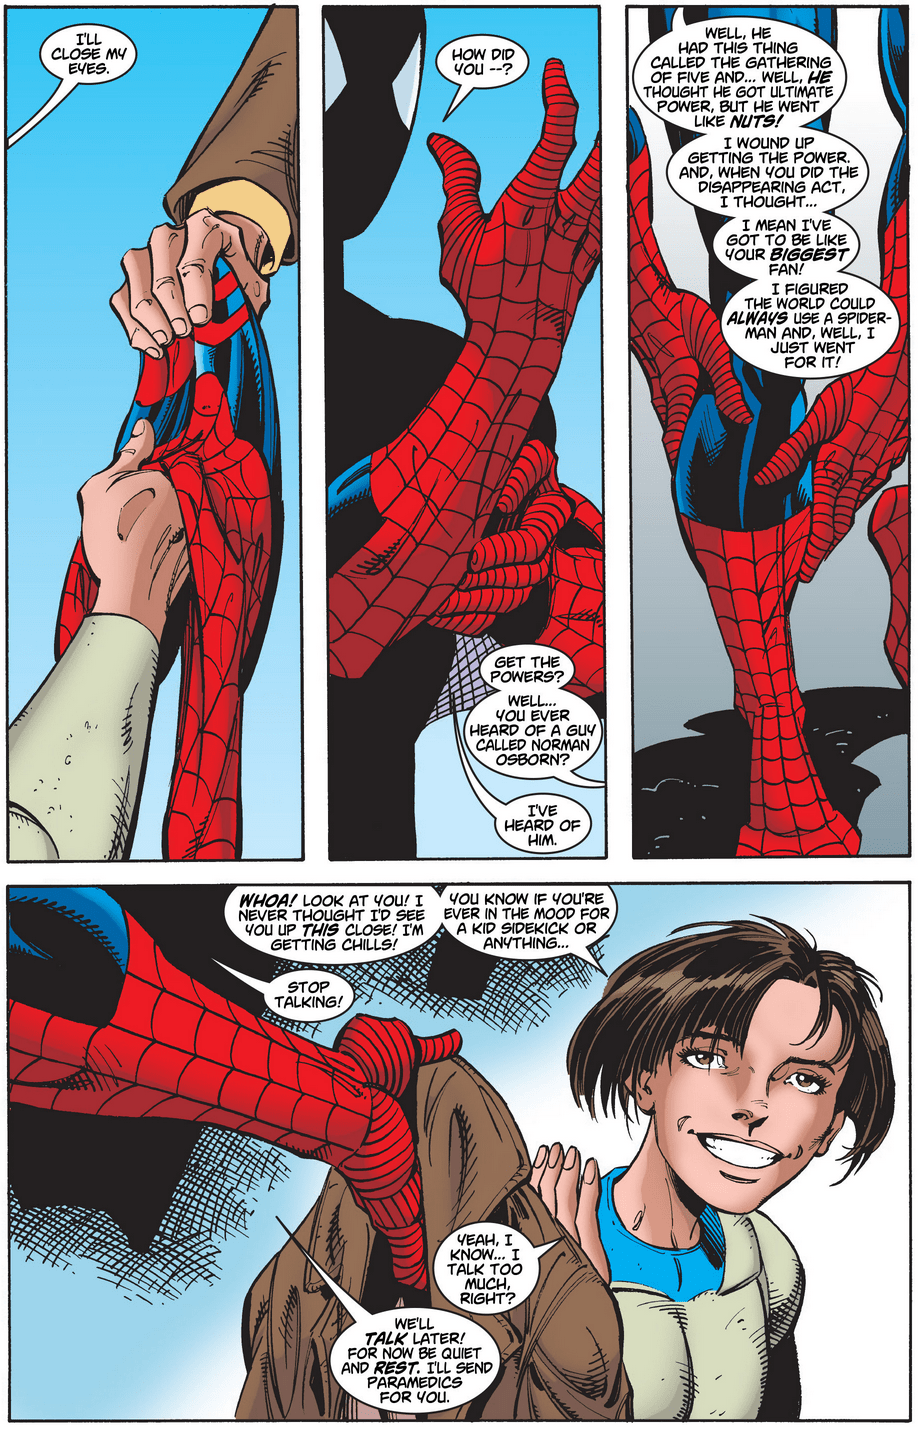 Mattie Franklin hands the Spider-suit back to its rightful owner in Amazing Spider-Man Vol. 2 #2 "I can't...(and I don't want to)...but I must!" (1998), Marvel Comics. Words by Howard Mackie, art by John Byrne, Scott Hanna, Gregory Wright, Richard Starkings, and Liz Agraphiotis.